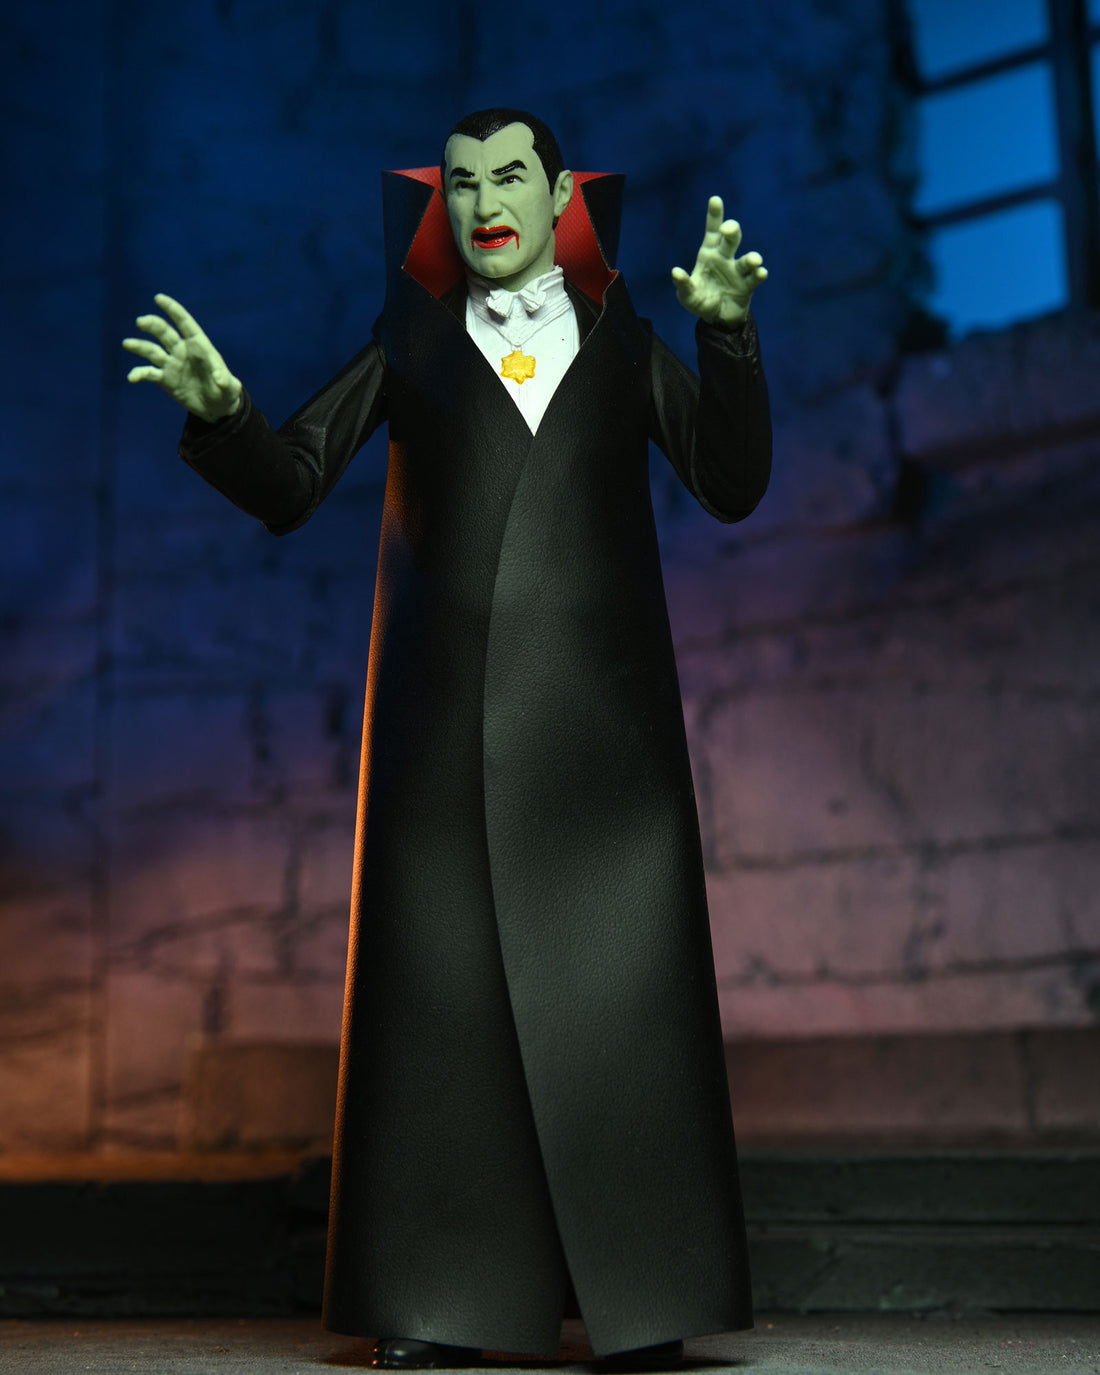 Universal Monsters - Glow-in-the-Dark Retro Dracula 7” Scale Action Figure 